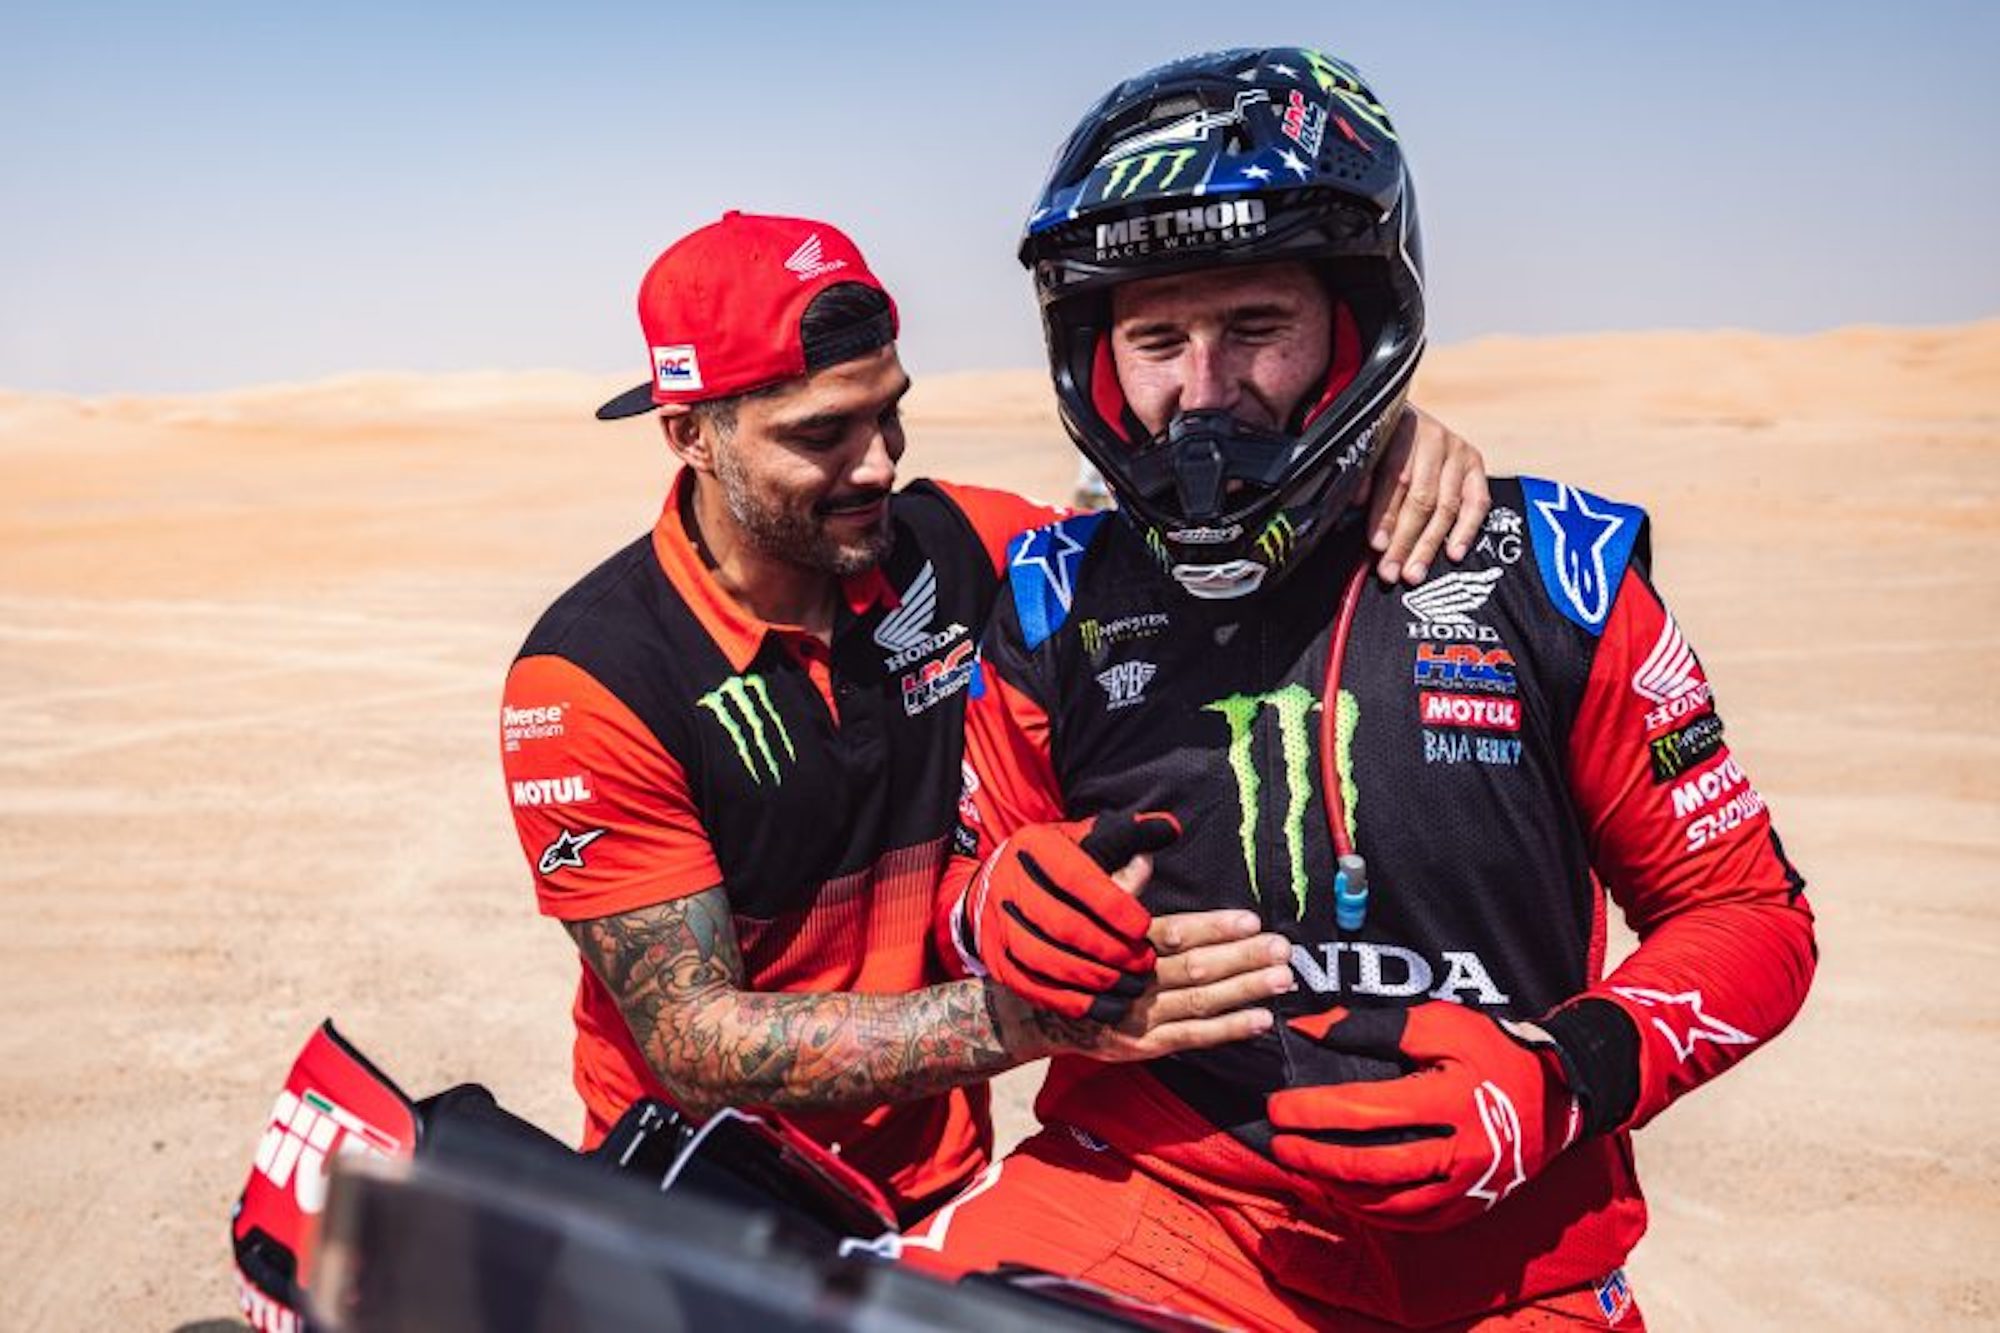 A view of Adrien Van Beveren, who won the Abu Dhabi Desert Challenge. Media sourced from a recent press release from Monster Energy Honda.  